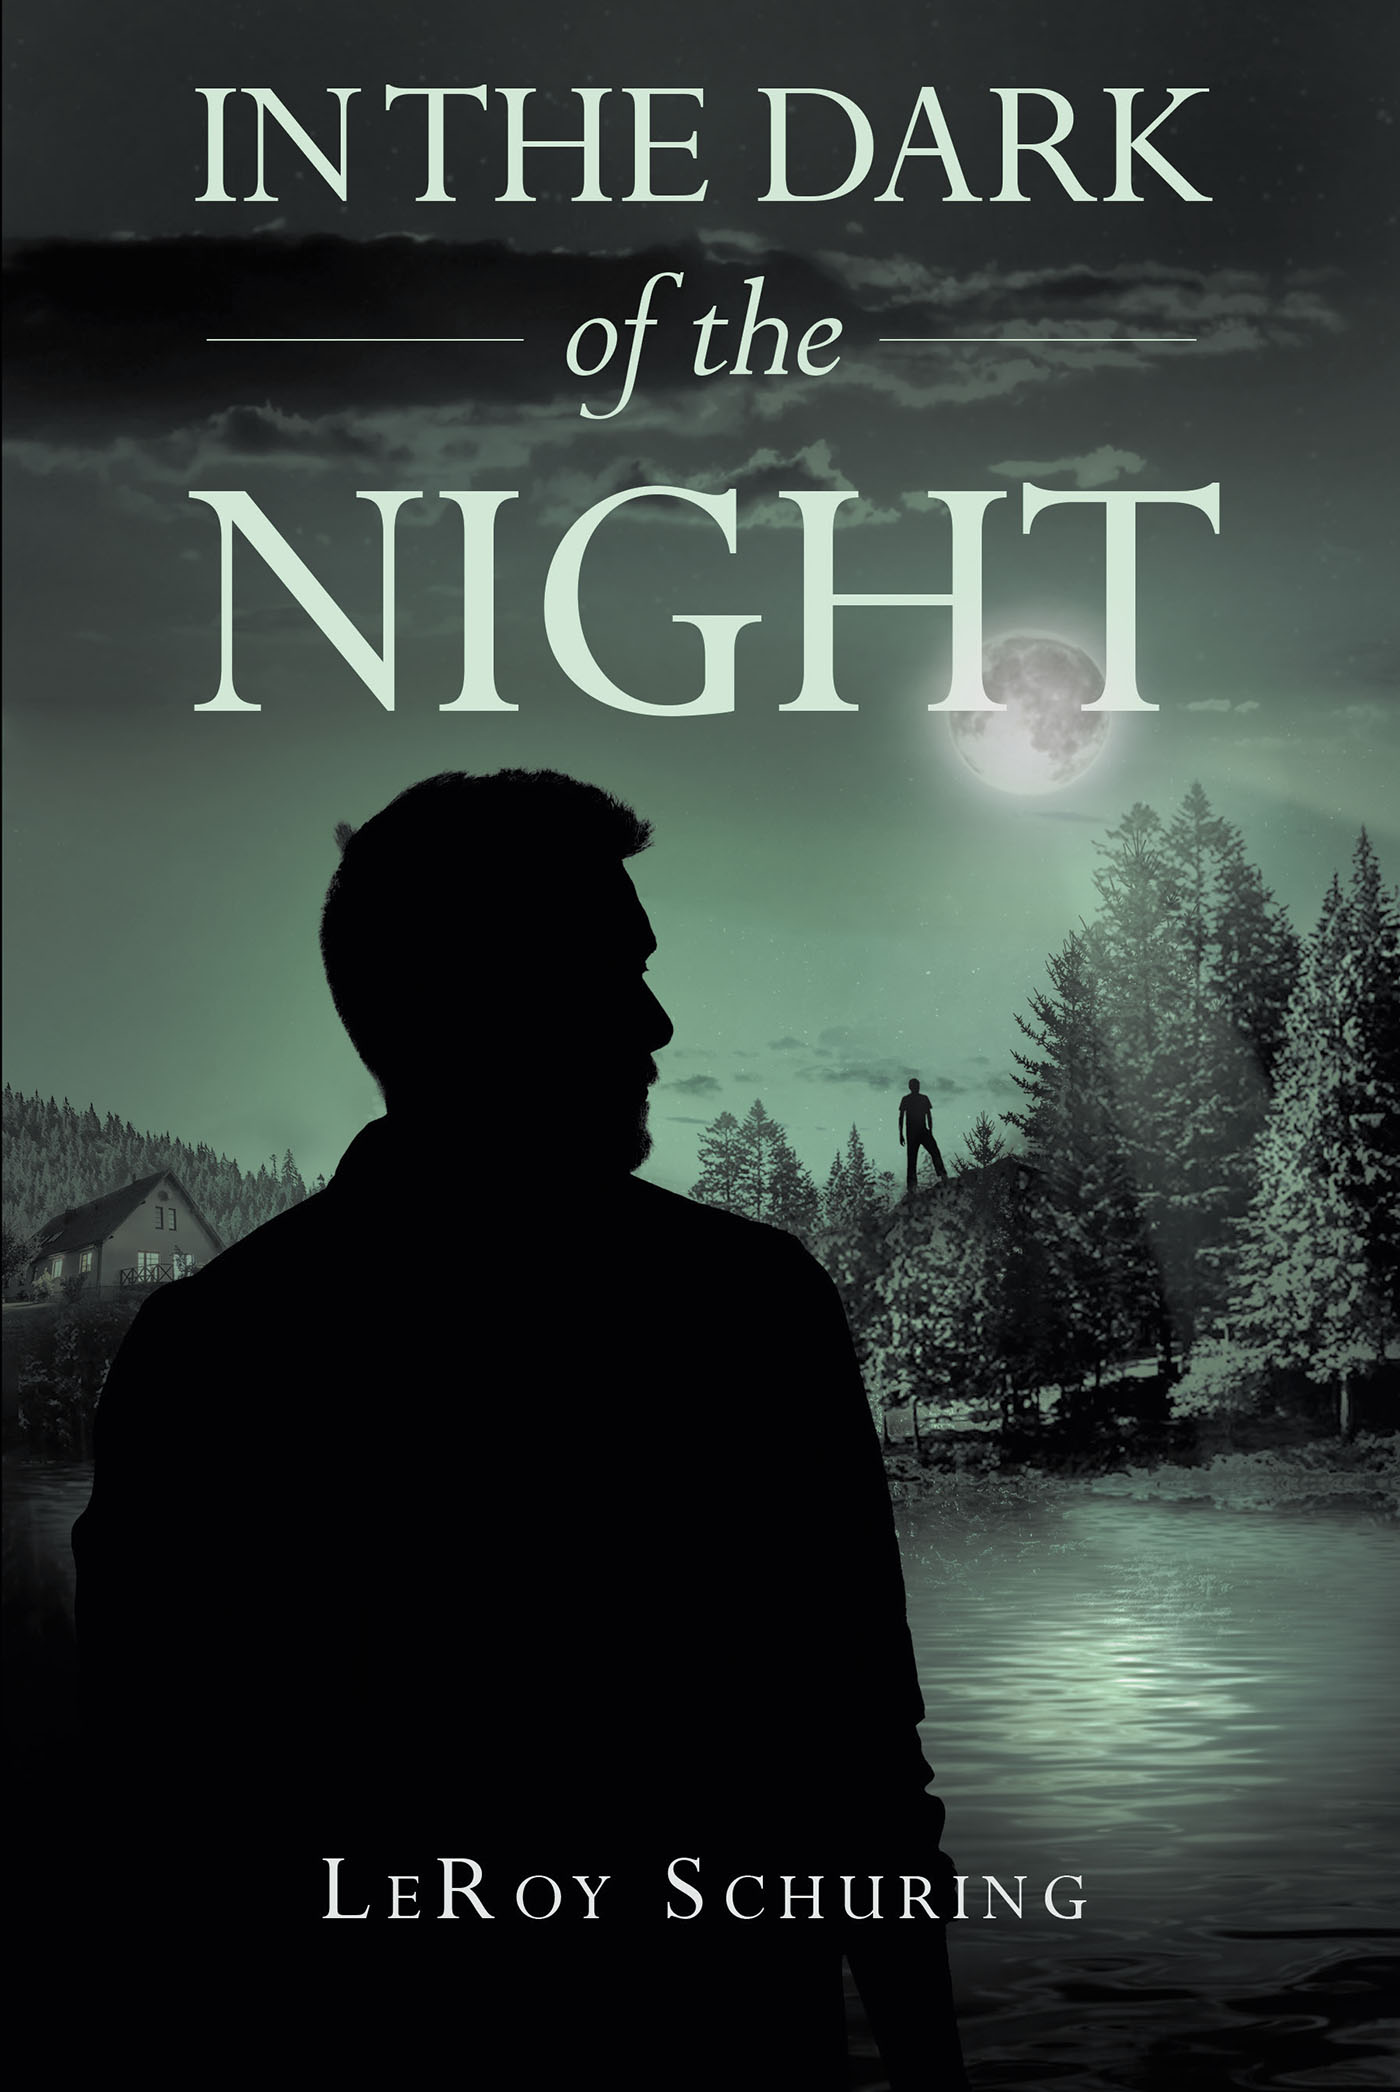 Author LeRoy Schuring’s New Book, “In the Dark of the Night” is a Suspenseful Novel That Follows a Young Man Who Finds Himself in the Middle of a Dark Plot